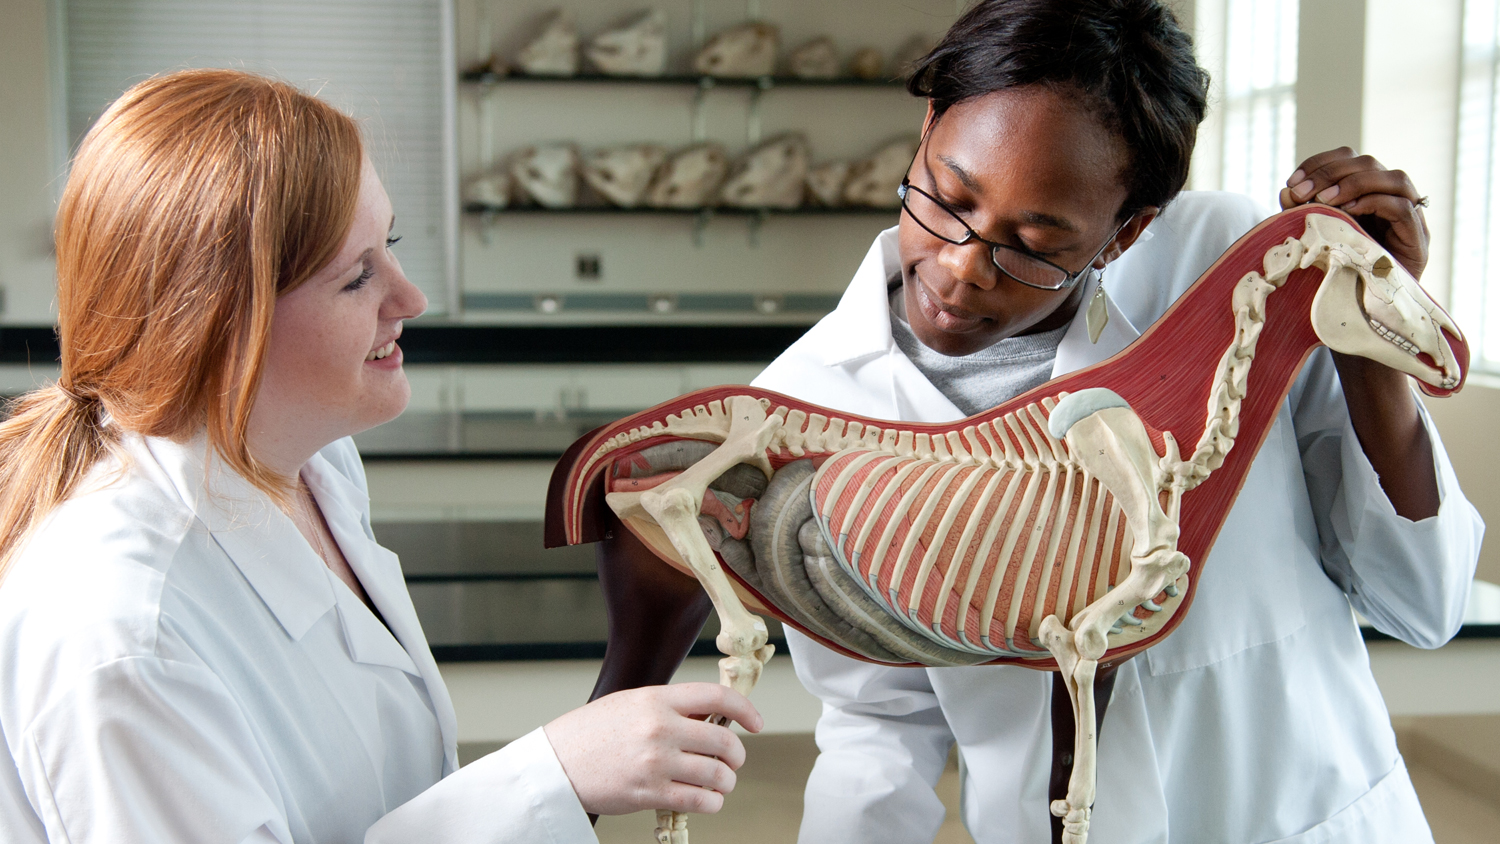 Researches examine model of horse skeleton